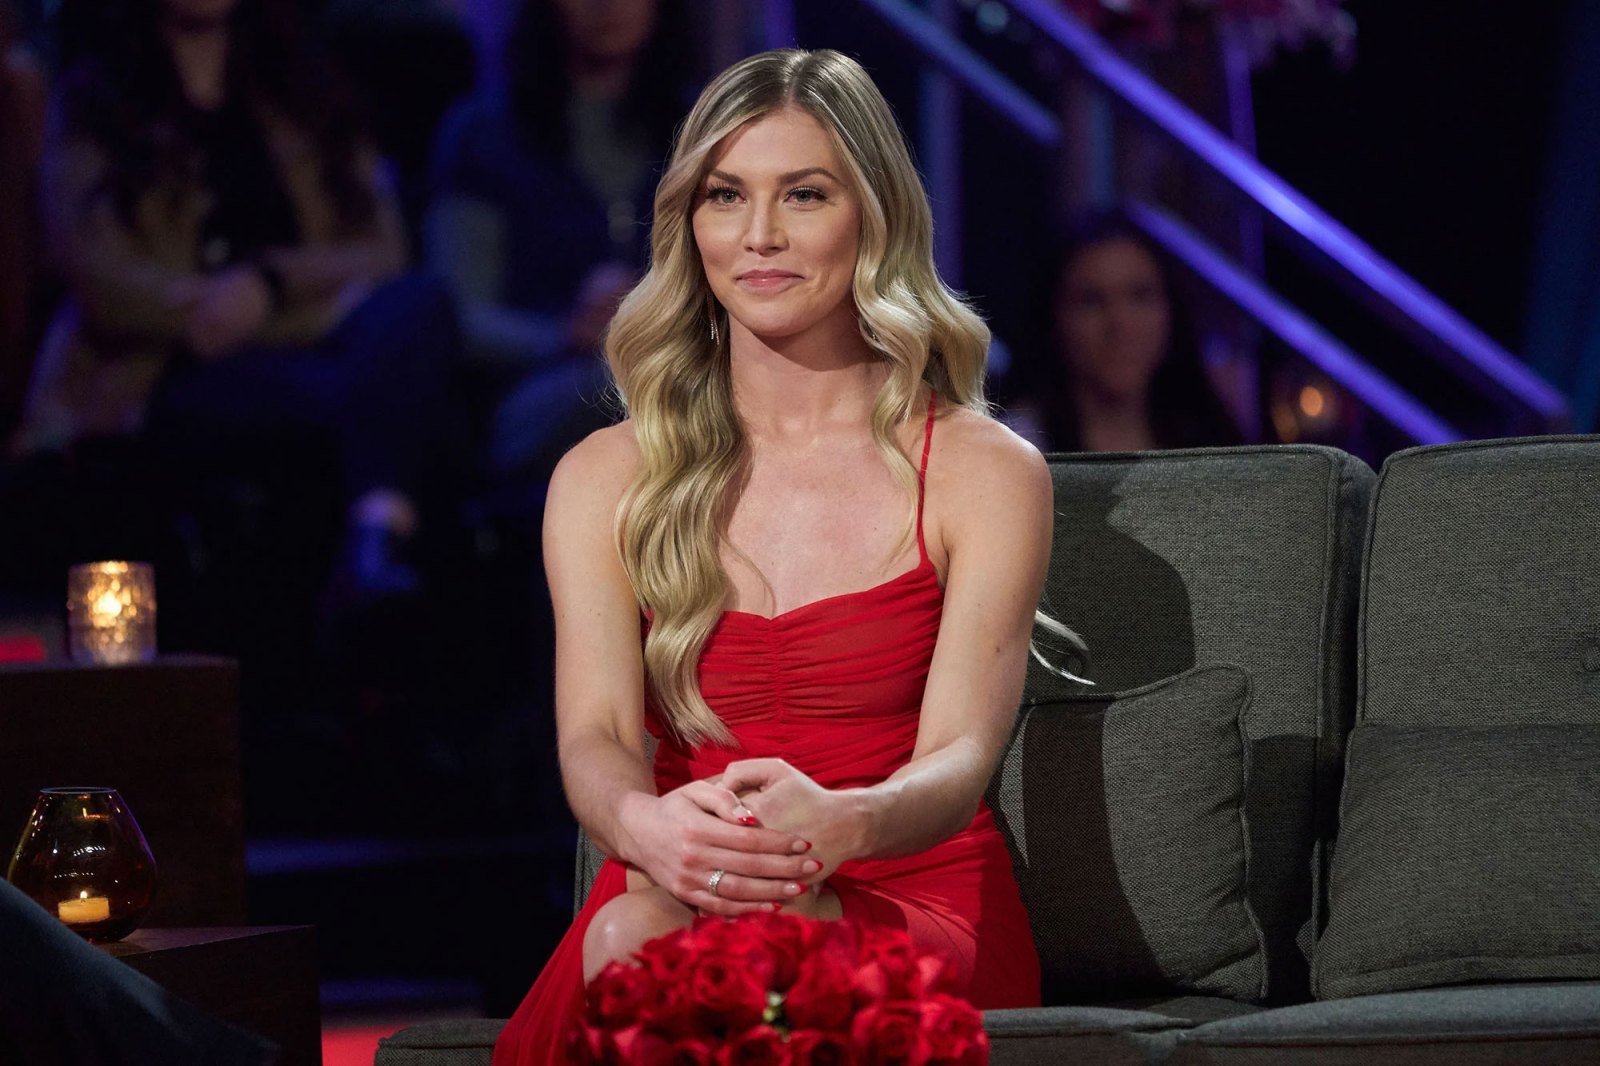 Bachelor Nation's Shanae Ankney: 5 Things to Know About Her Drama